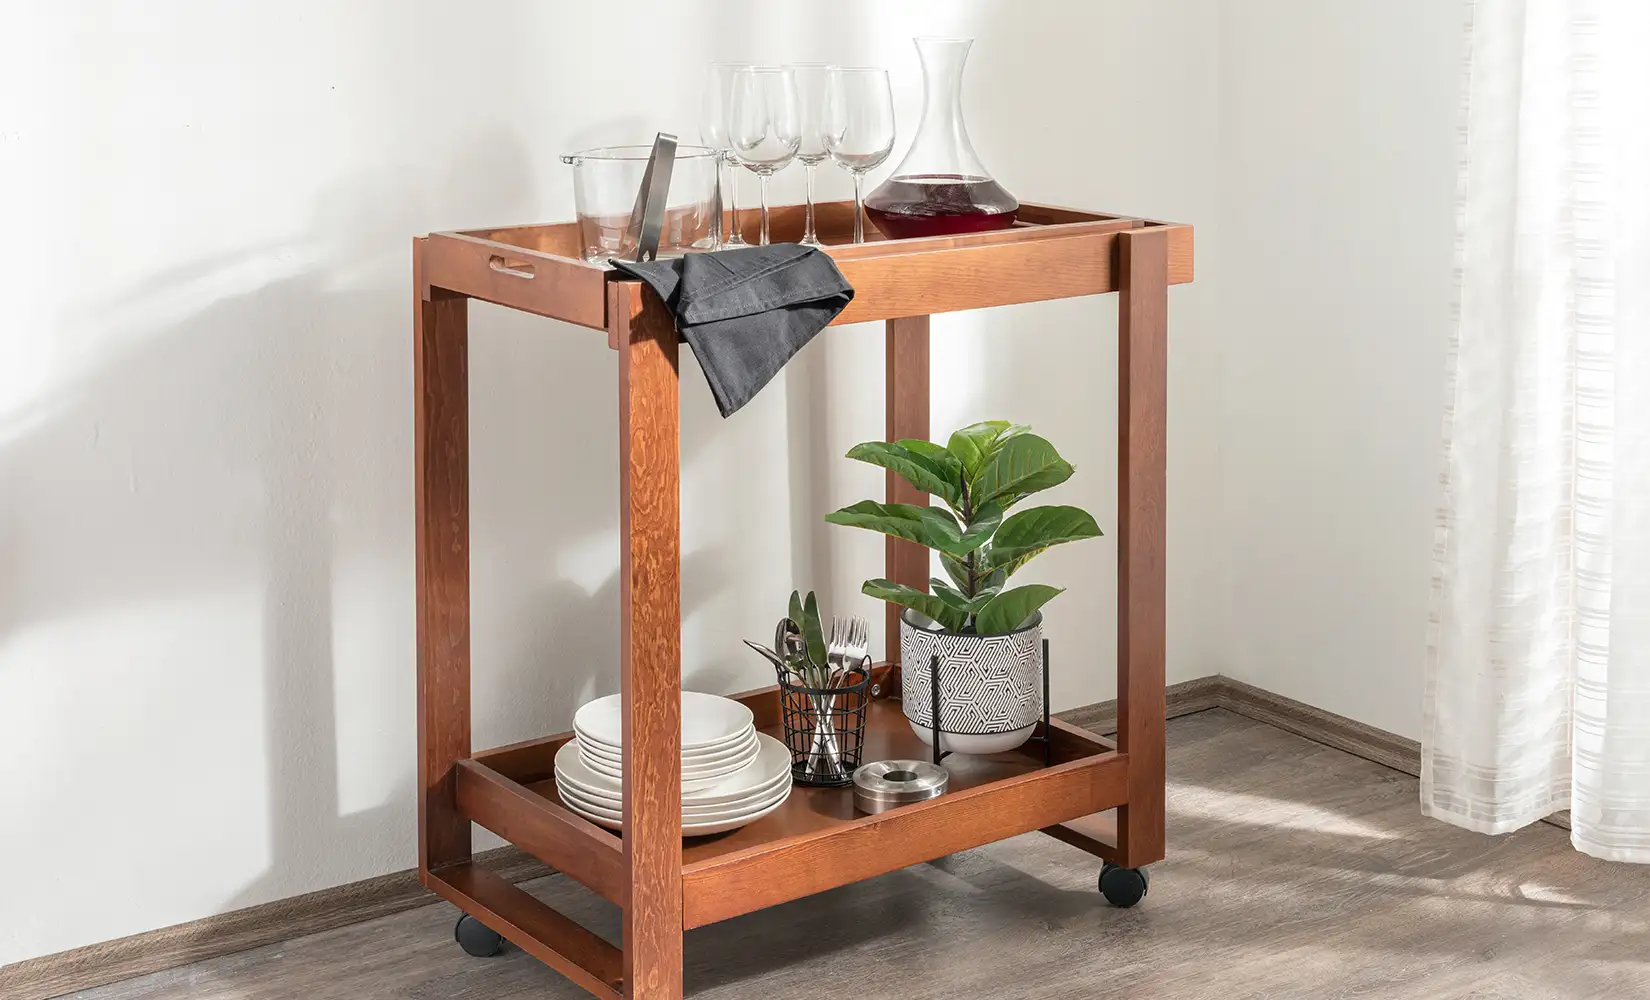 Wooden industrial kitchen cart with four wheels carrying dishware.